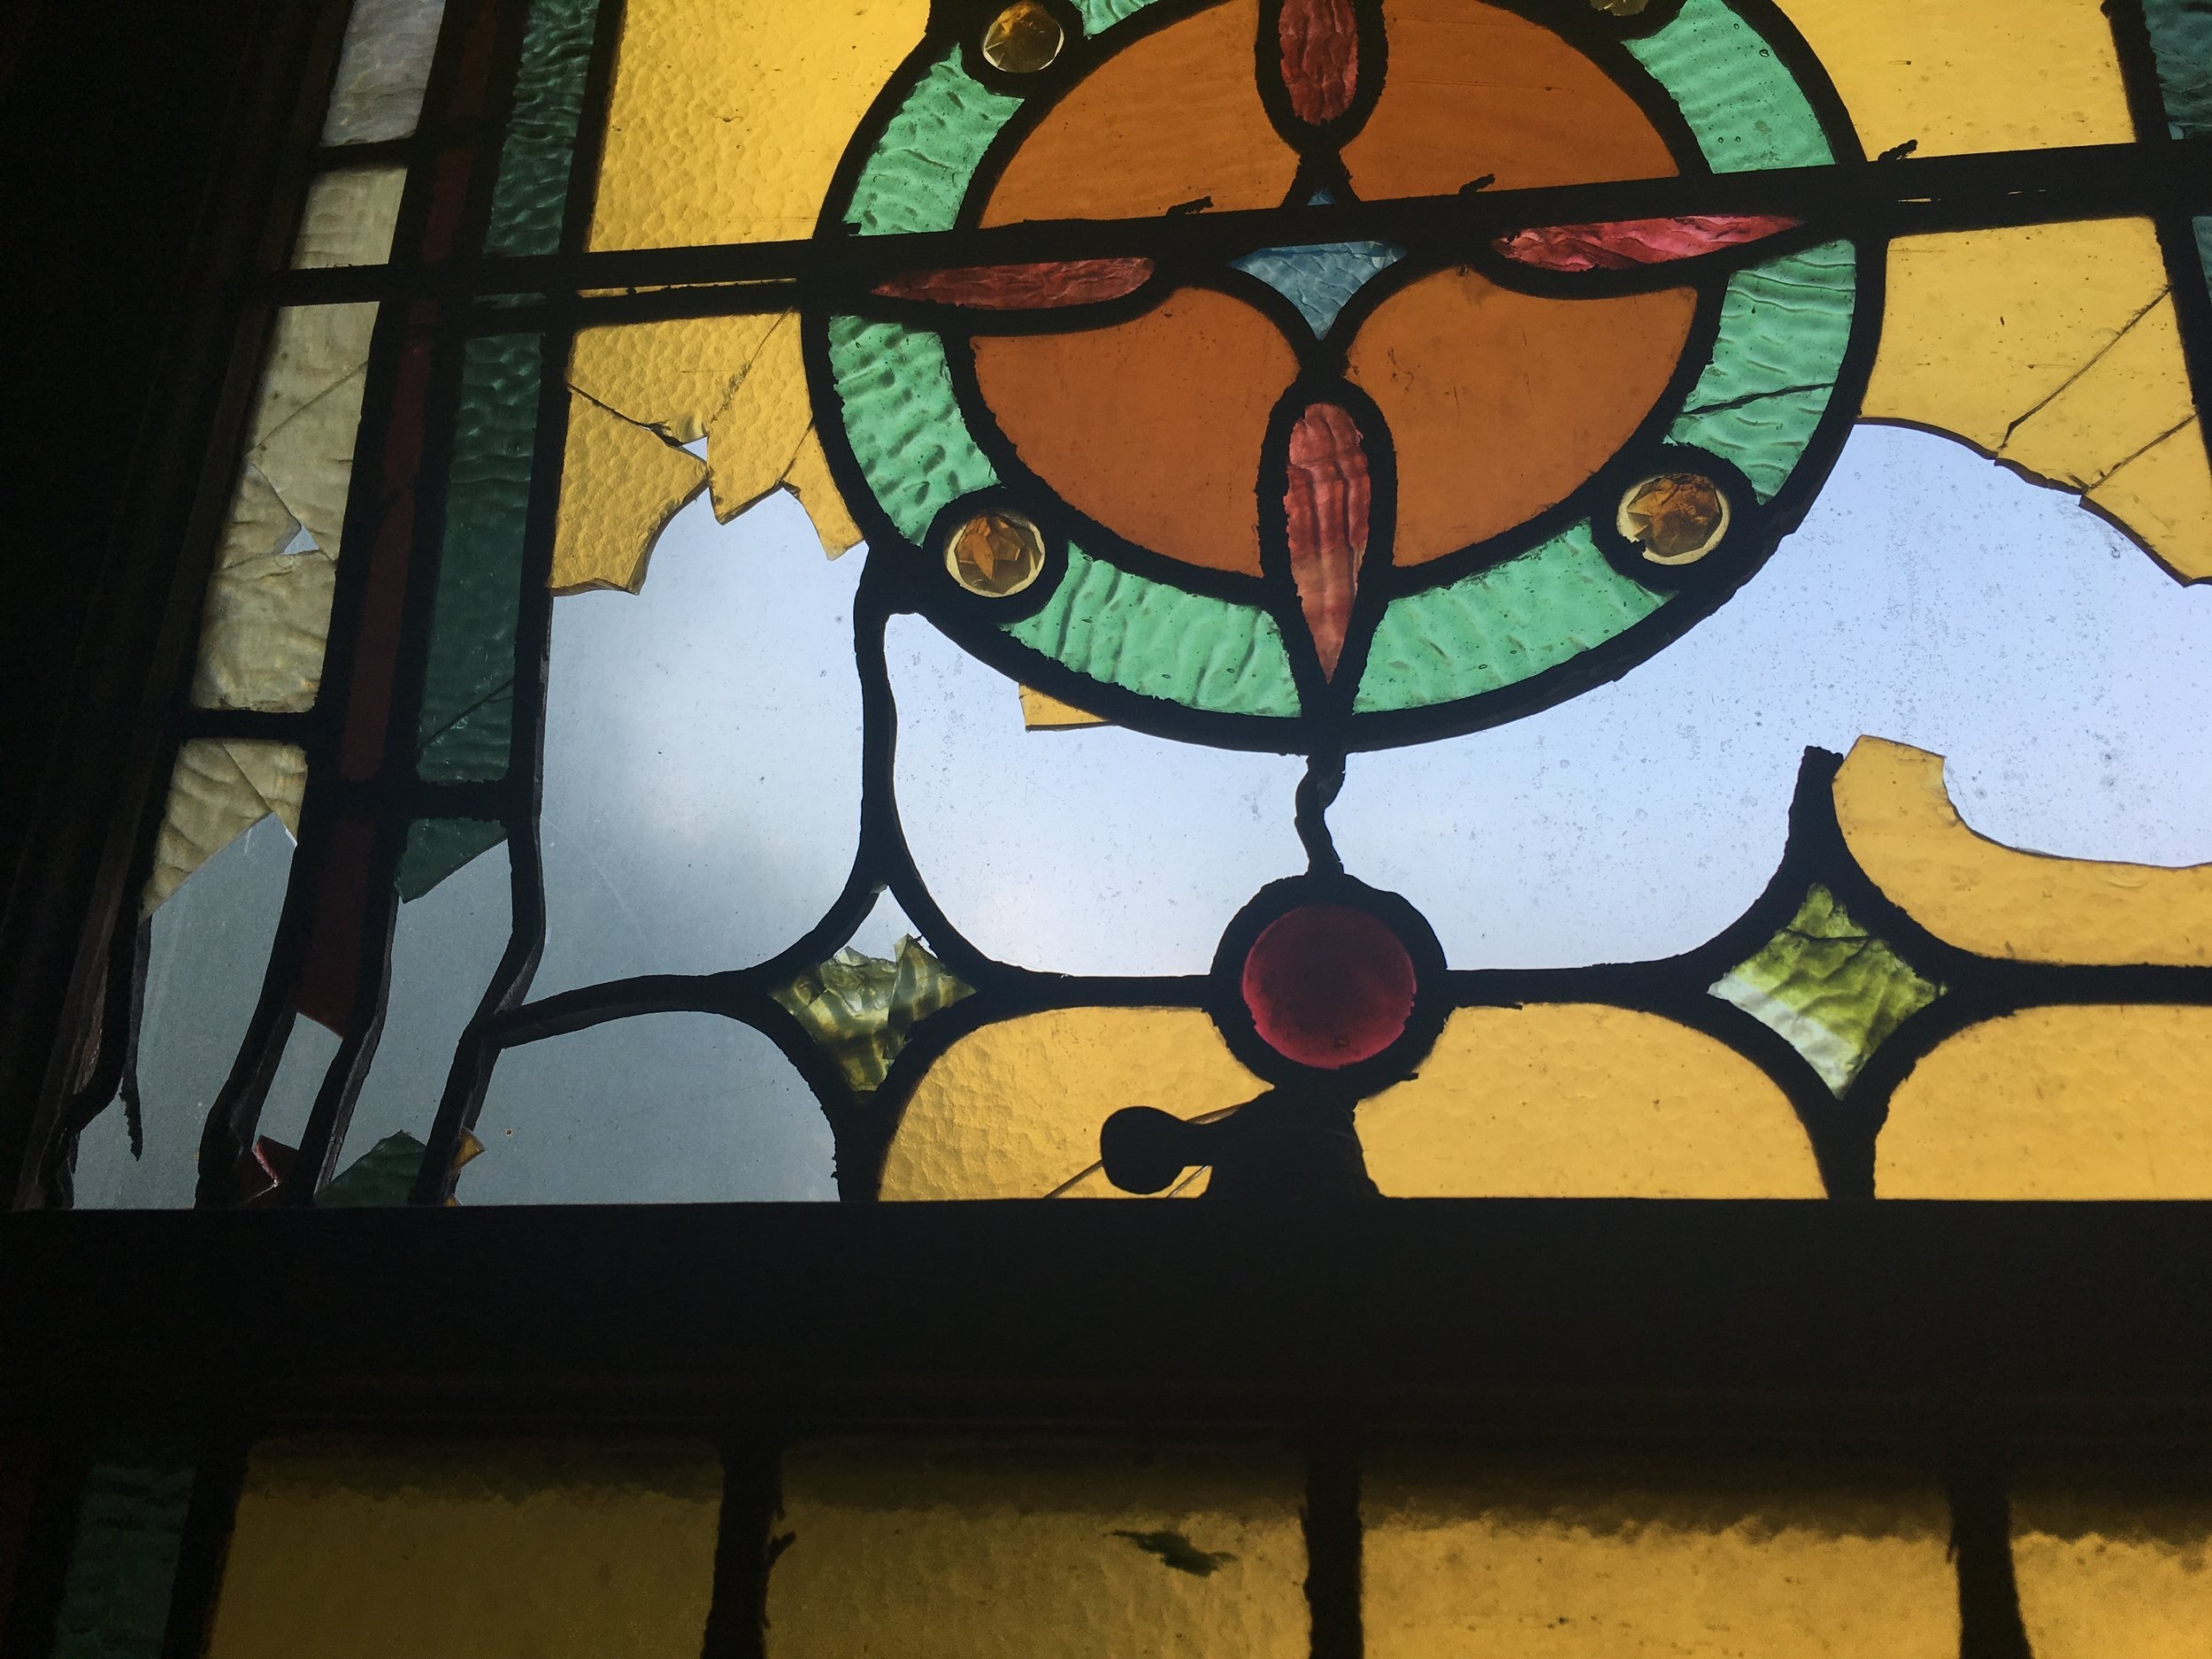  Many of the stained glass windows have been damaged since 1923 from a fire next door. 